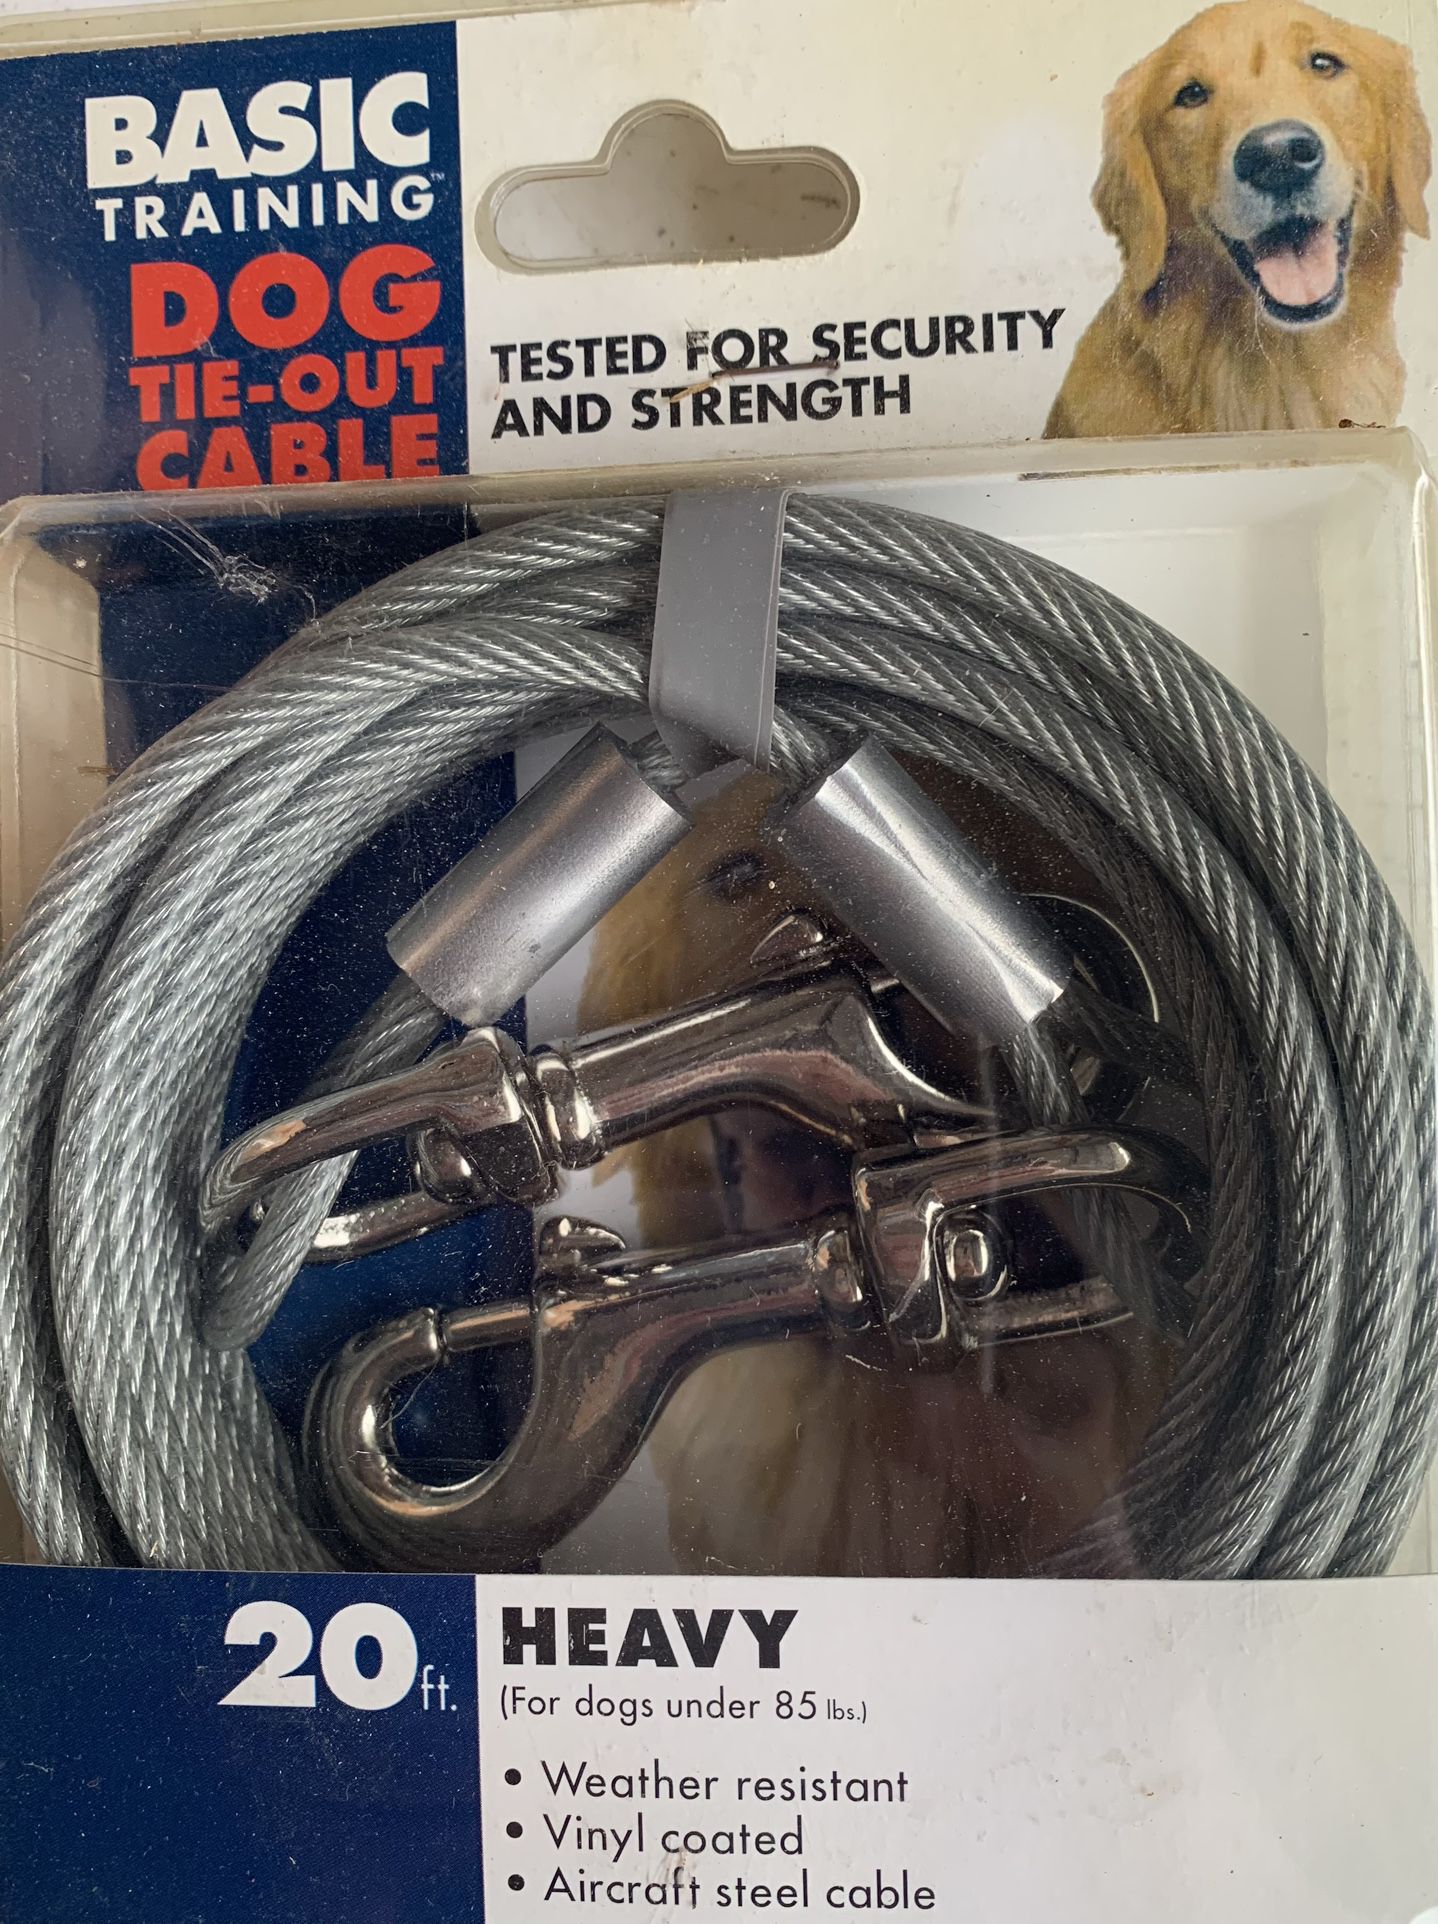 Dog Tie-Out Cable 